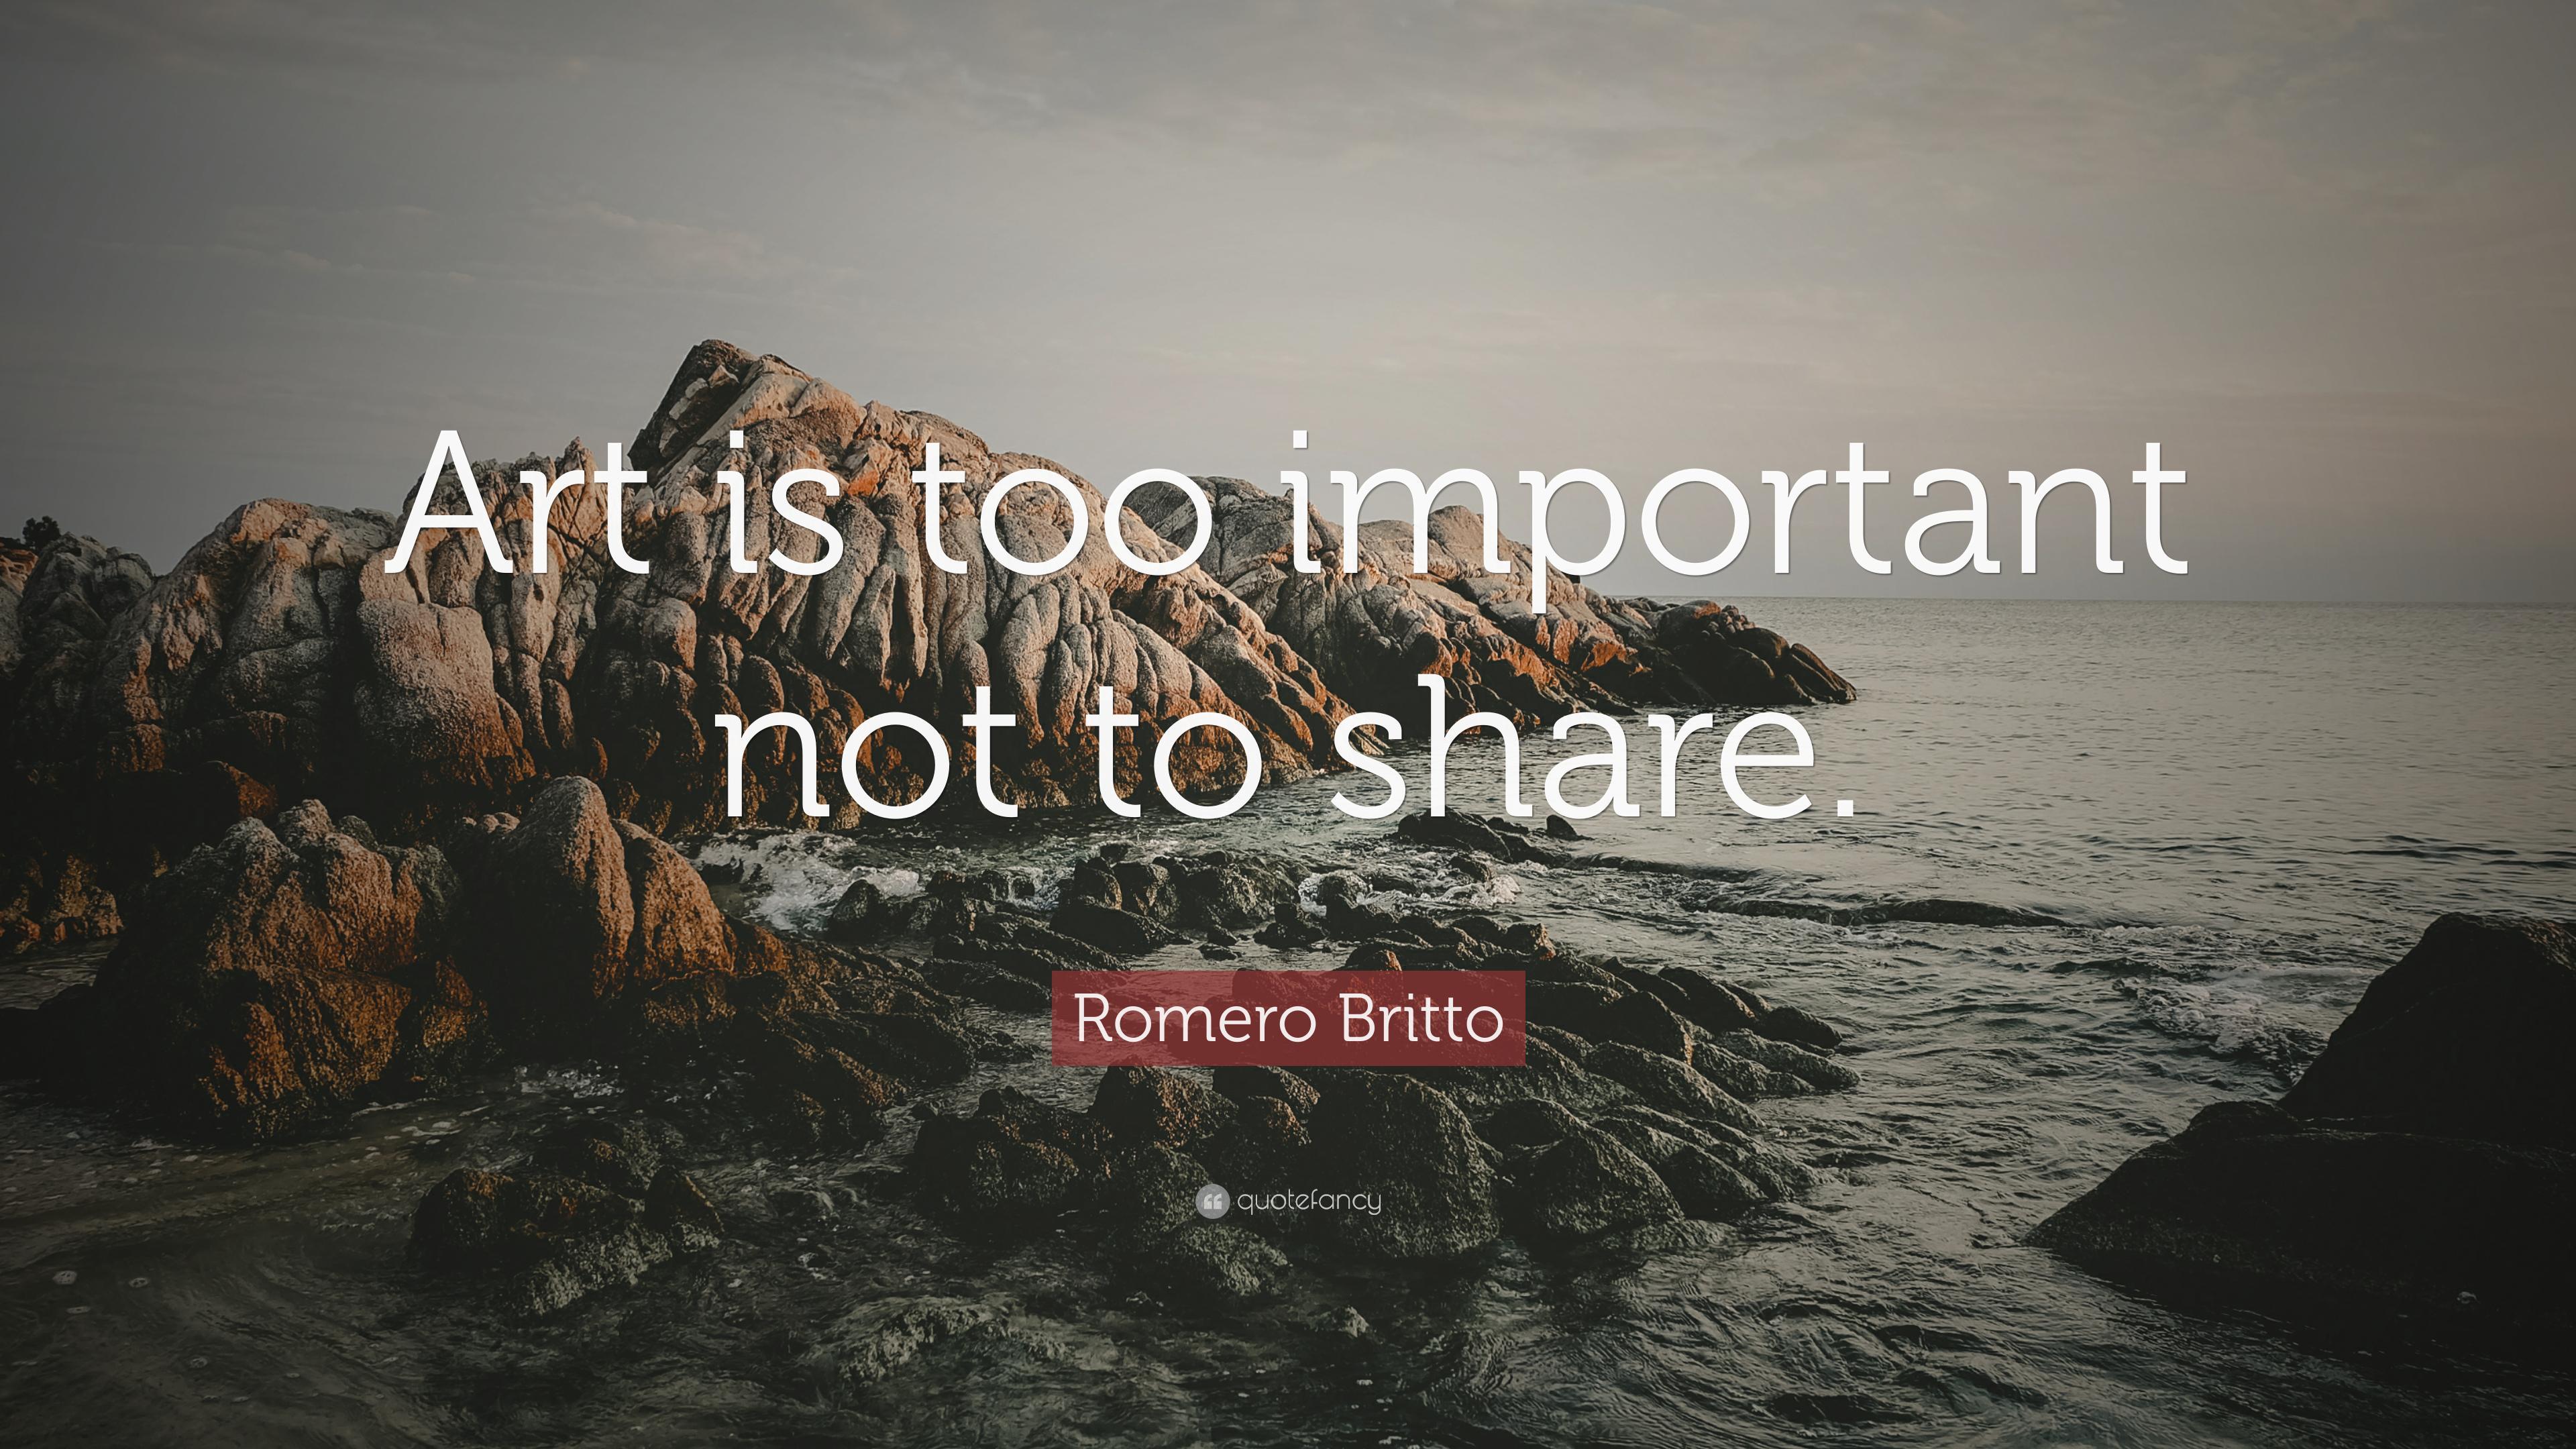 Romero Britto Quote: “Art is too important not to share.” 7